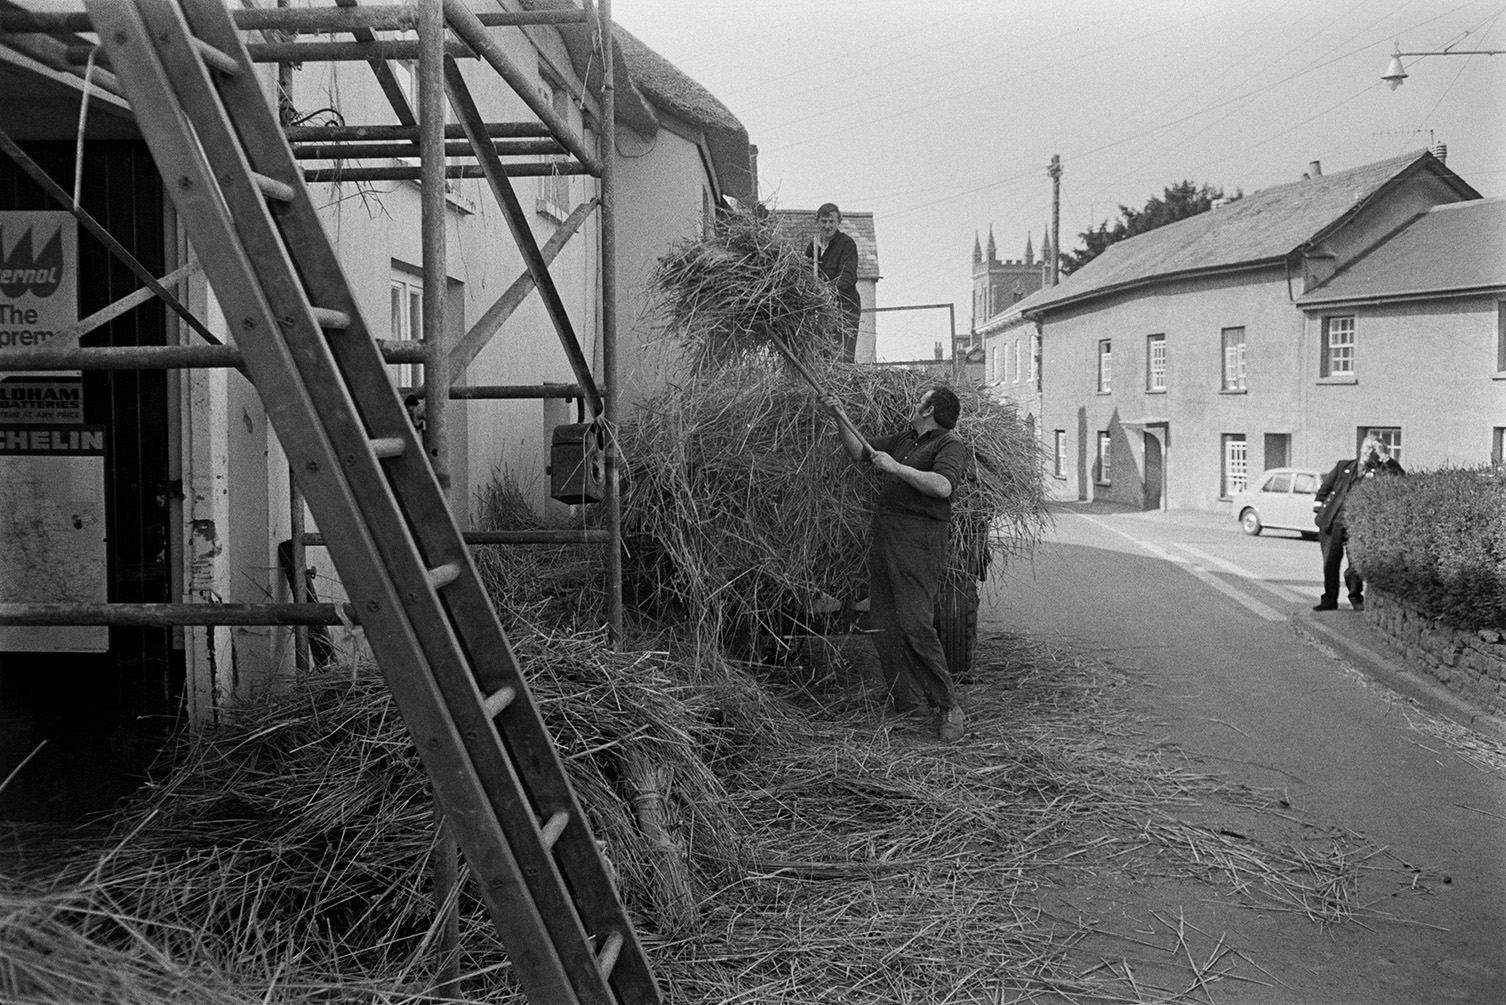 Two men loading old thatch reed which has been taken off a roof, onto a tractor and trailer in a street in Witheridge. They are using pitchforks. Scaffolding and a ladder are by the building being thatched. A man is watching from the other side of the street and Witheridge Church tower can be seen in the background.